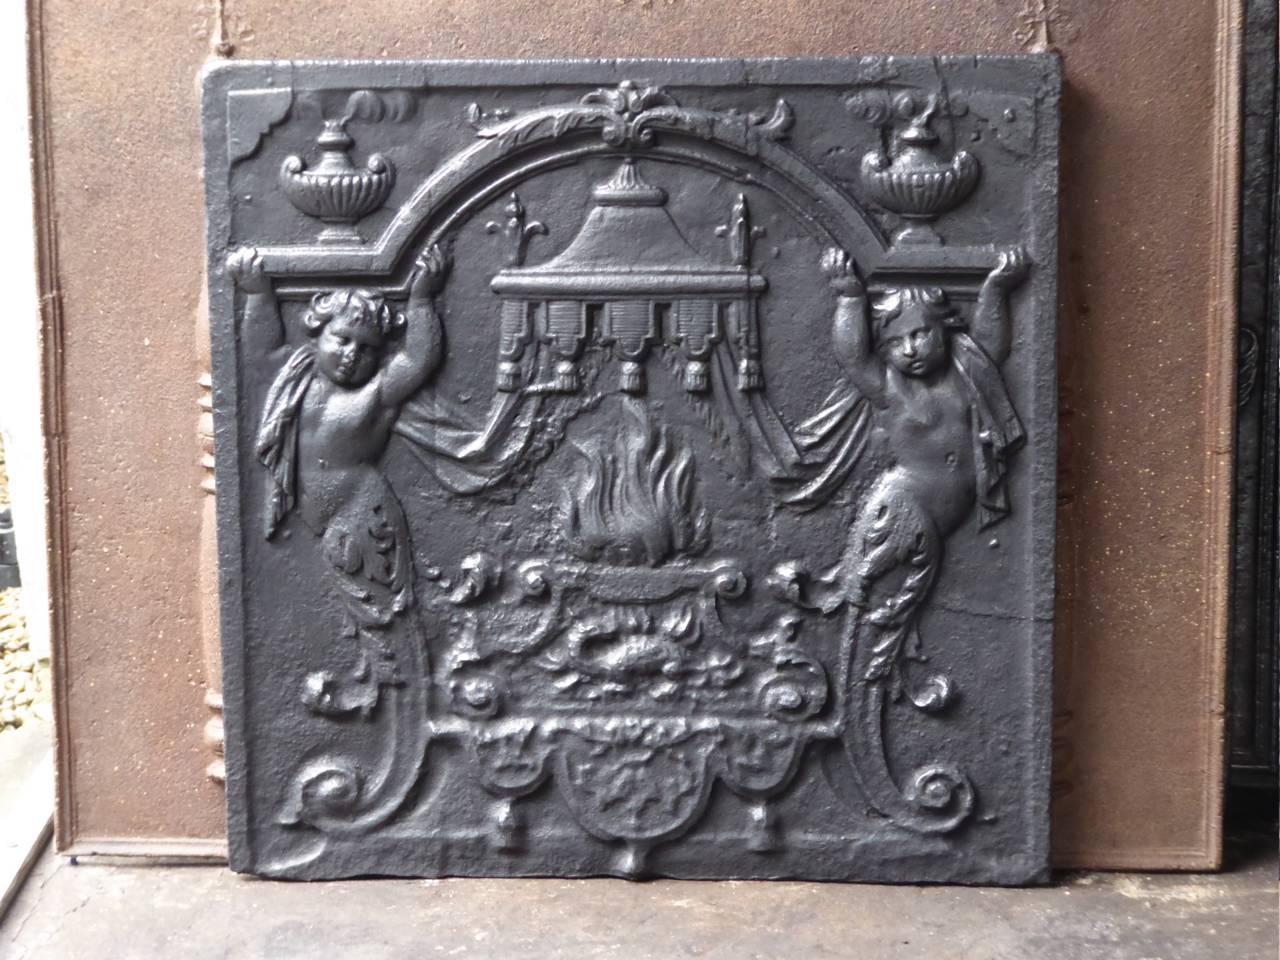 17th-18th century French fireback with coat of arms of France.

We have a unique and specialized collection of antique and used fireplace accessories consisting of more than 1000 listings at 1stdibs. Amongst others, we always have 300+ firebacks,